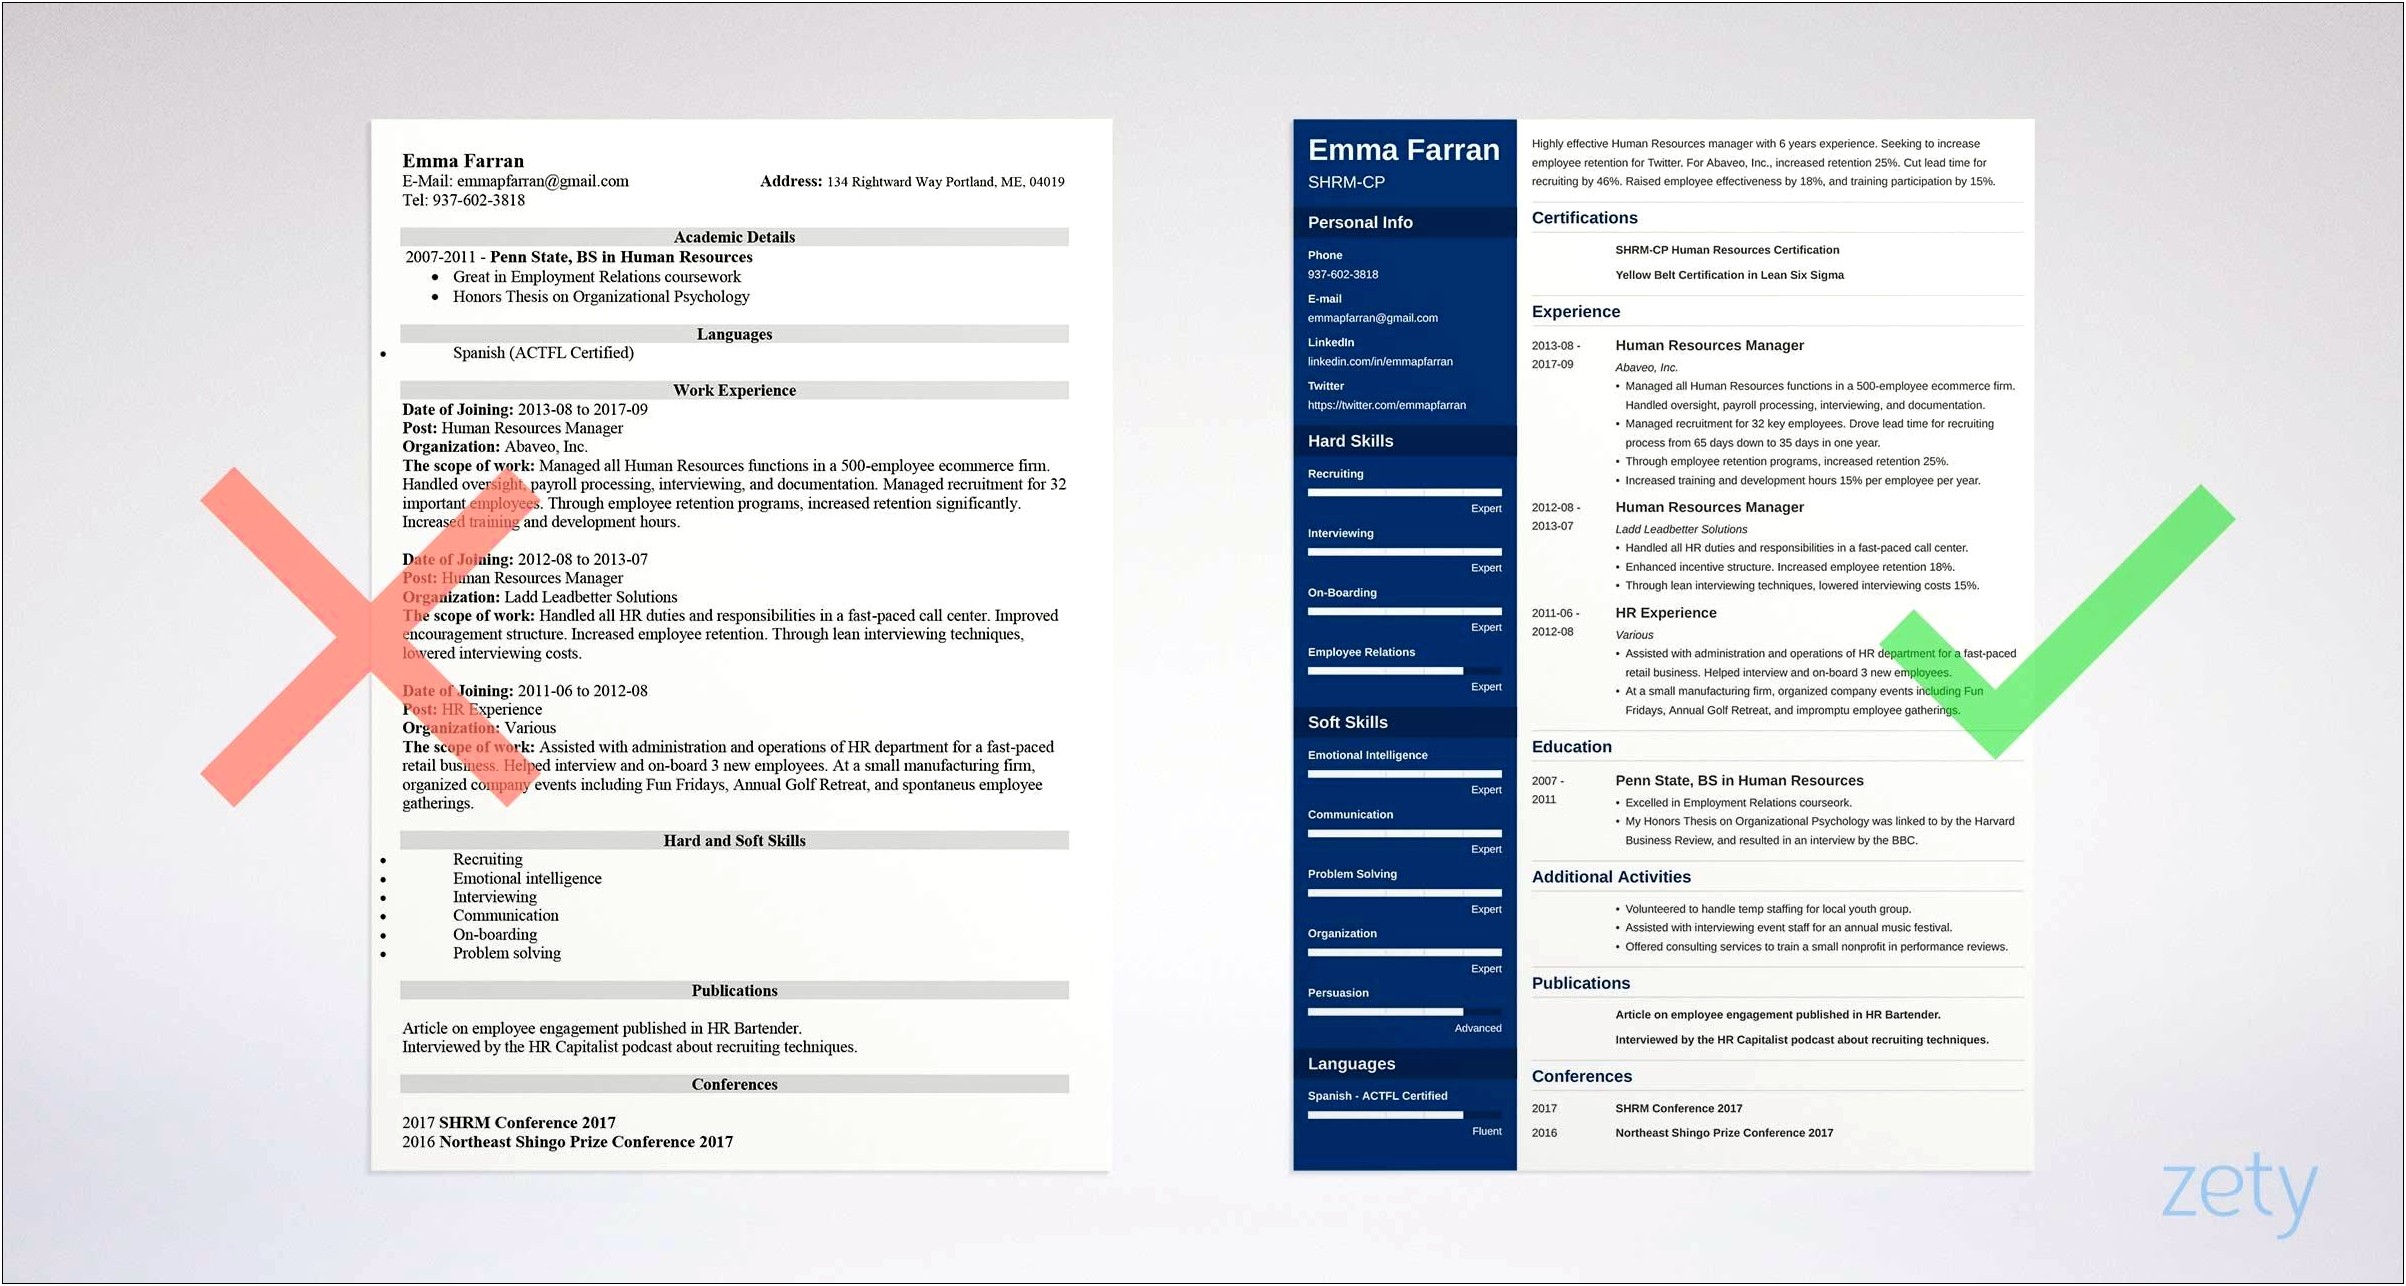 Hr Professional Resume Format In Word